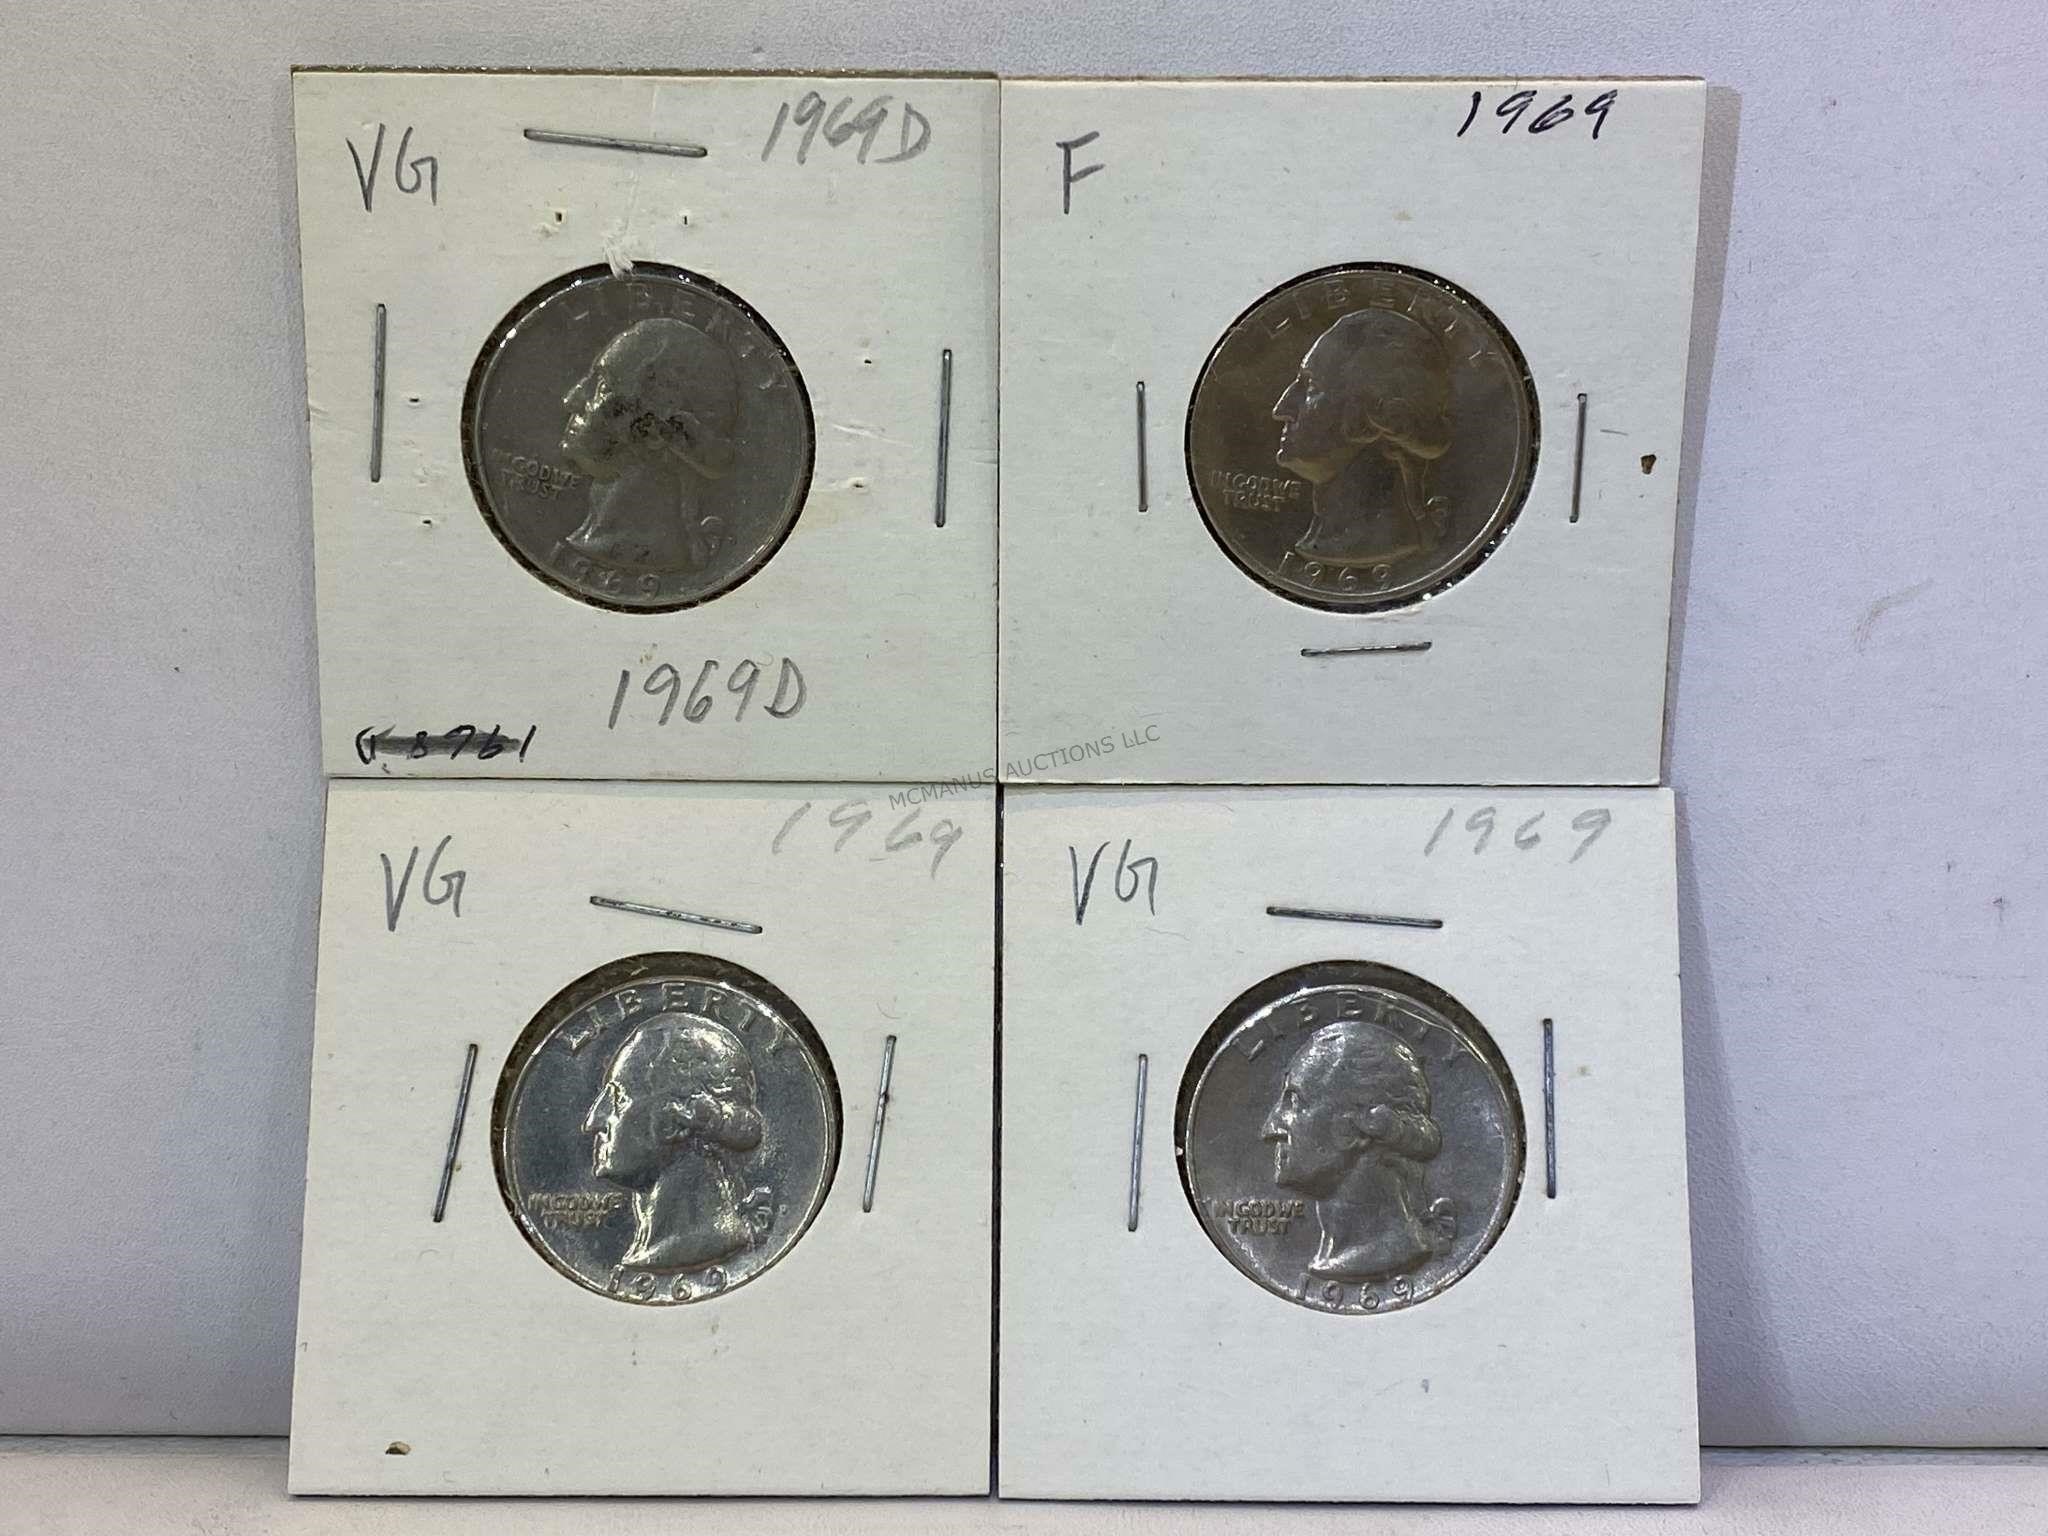 2/28/21 Sports Coins Jewelry Collectibles